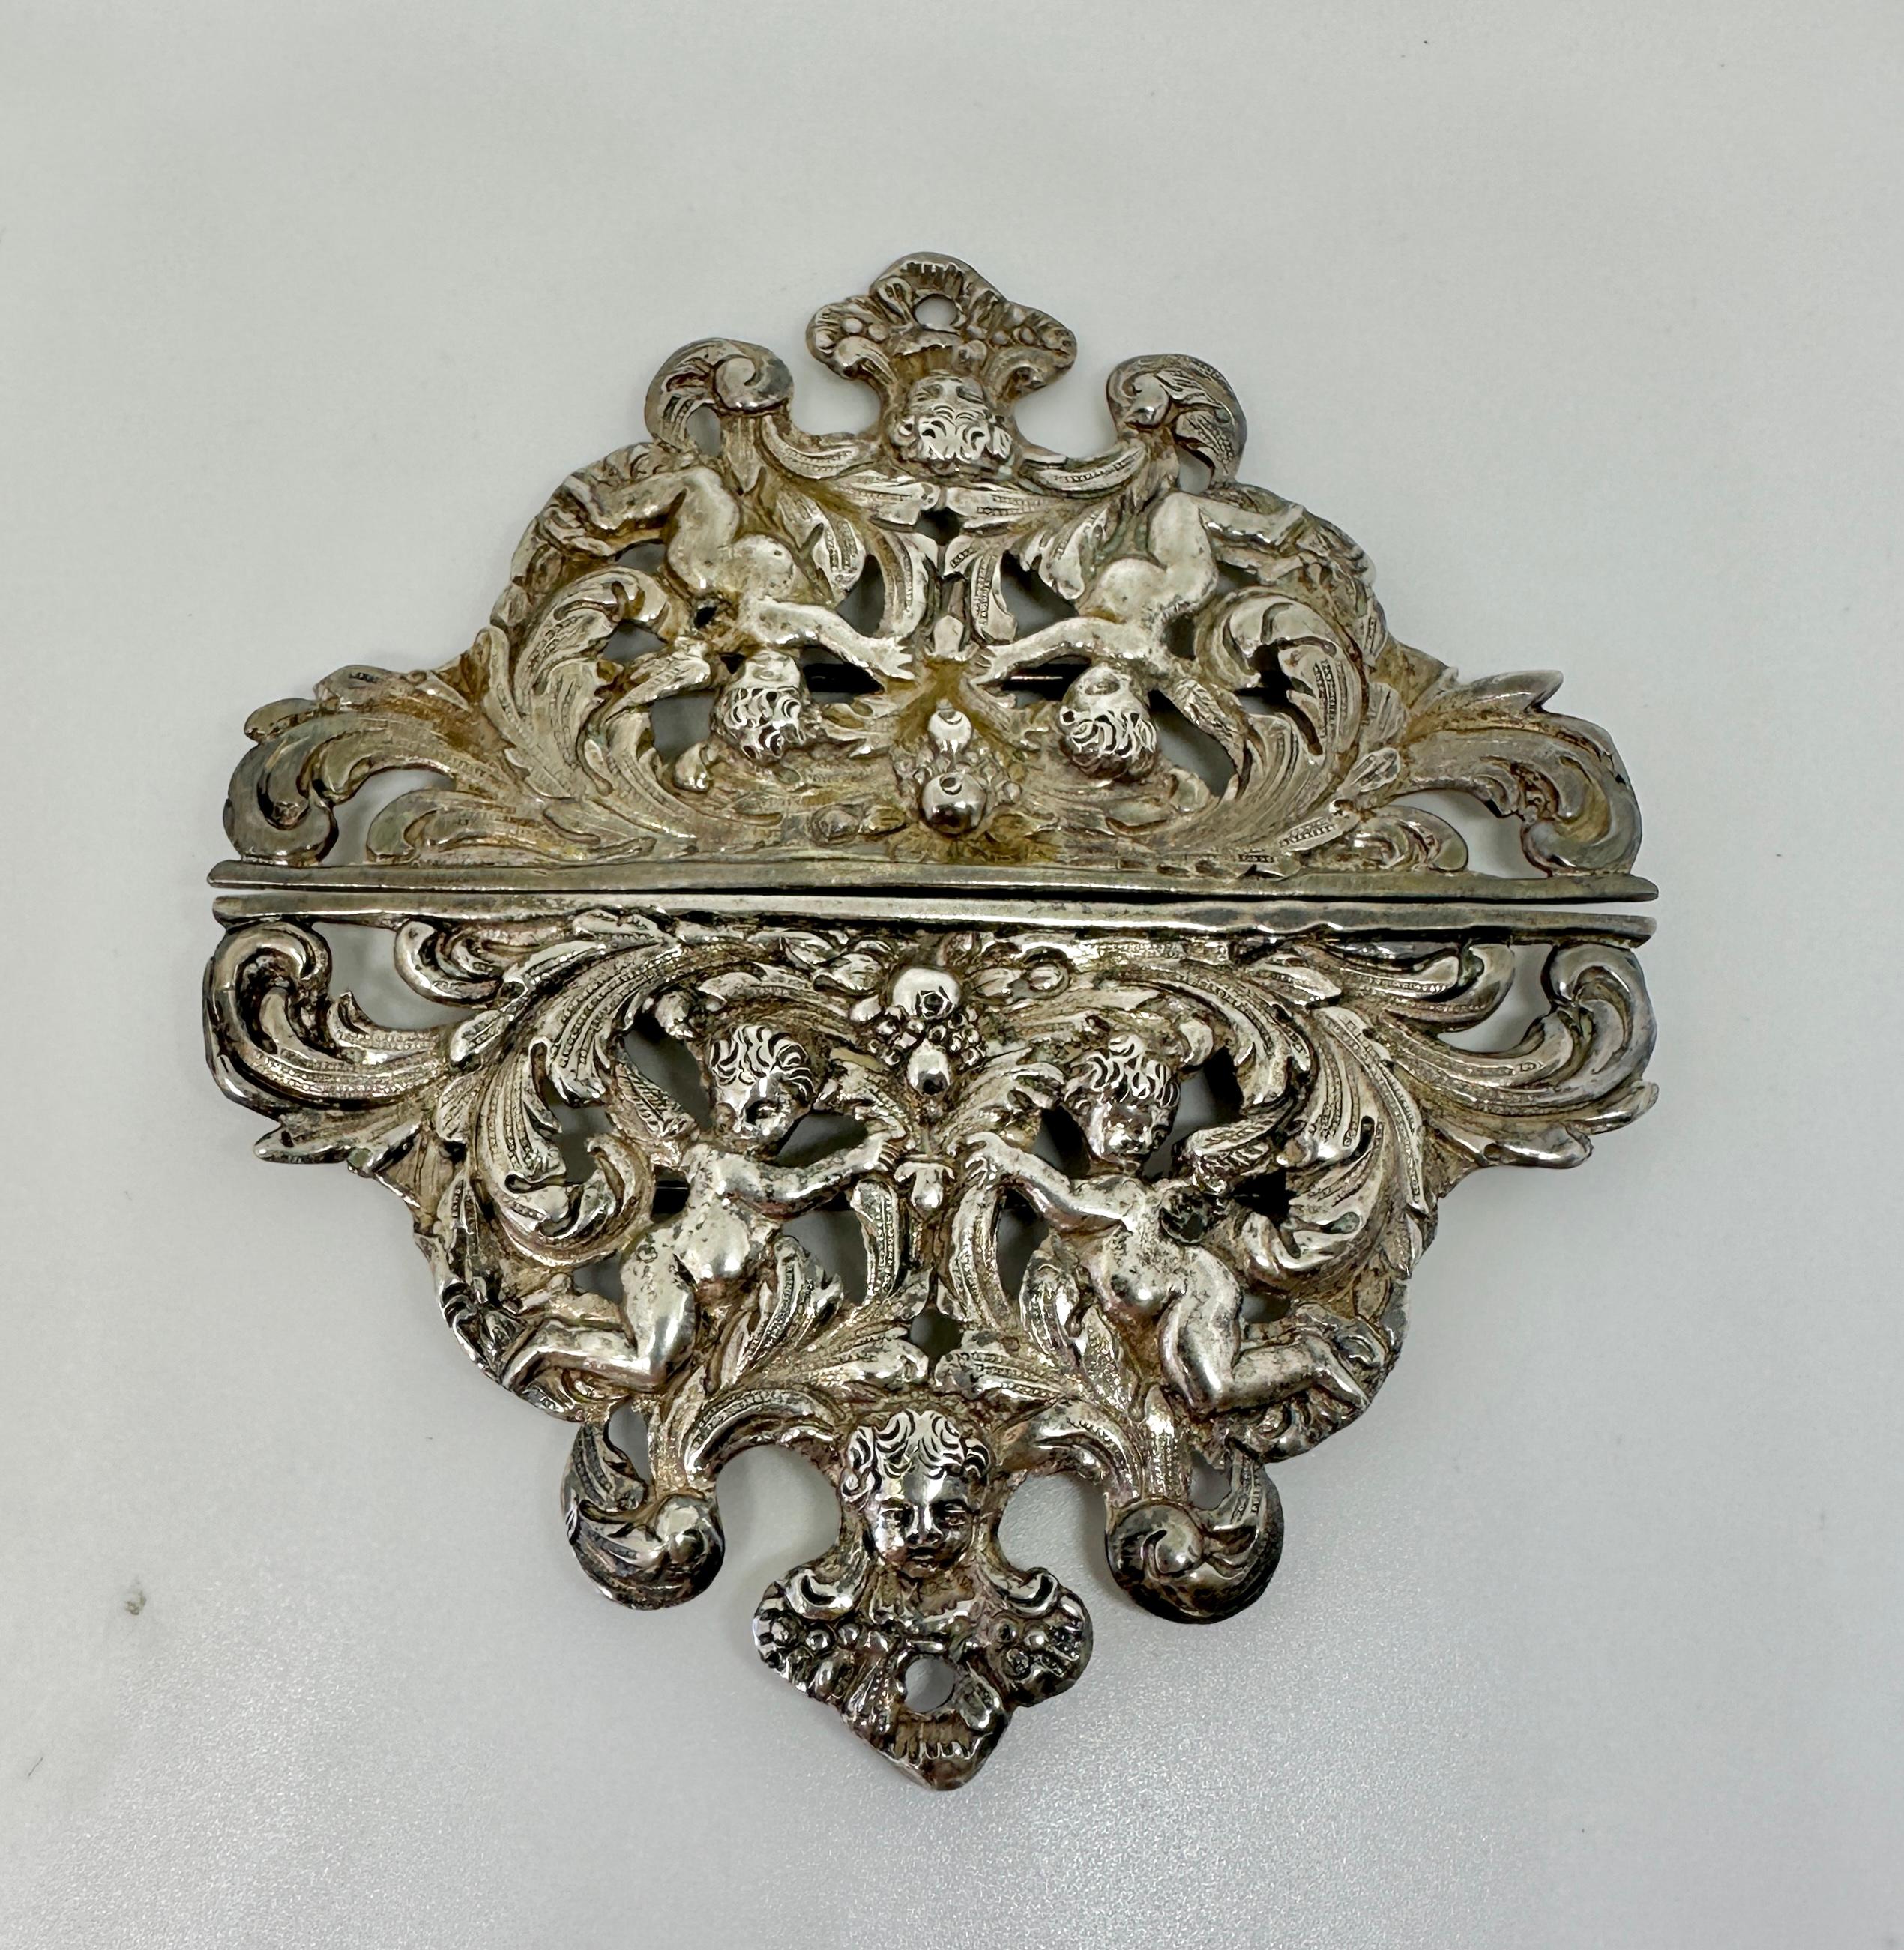 This is a stunning and rare large 4.5 inch antique Victorian Belle Epoque Belt Buckle in Sterling Silver with Cherub and Angel Imagery with acanthus leaf and fruit designs throughout.  The buckle is beautifully made with heavy Sterling Silver.  The